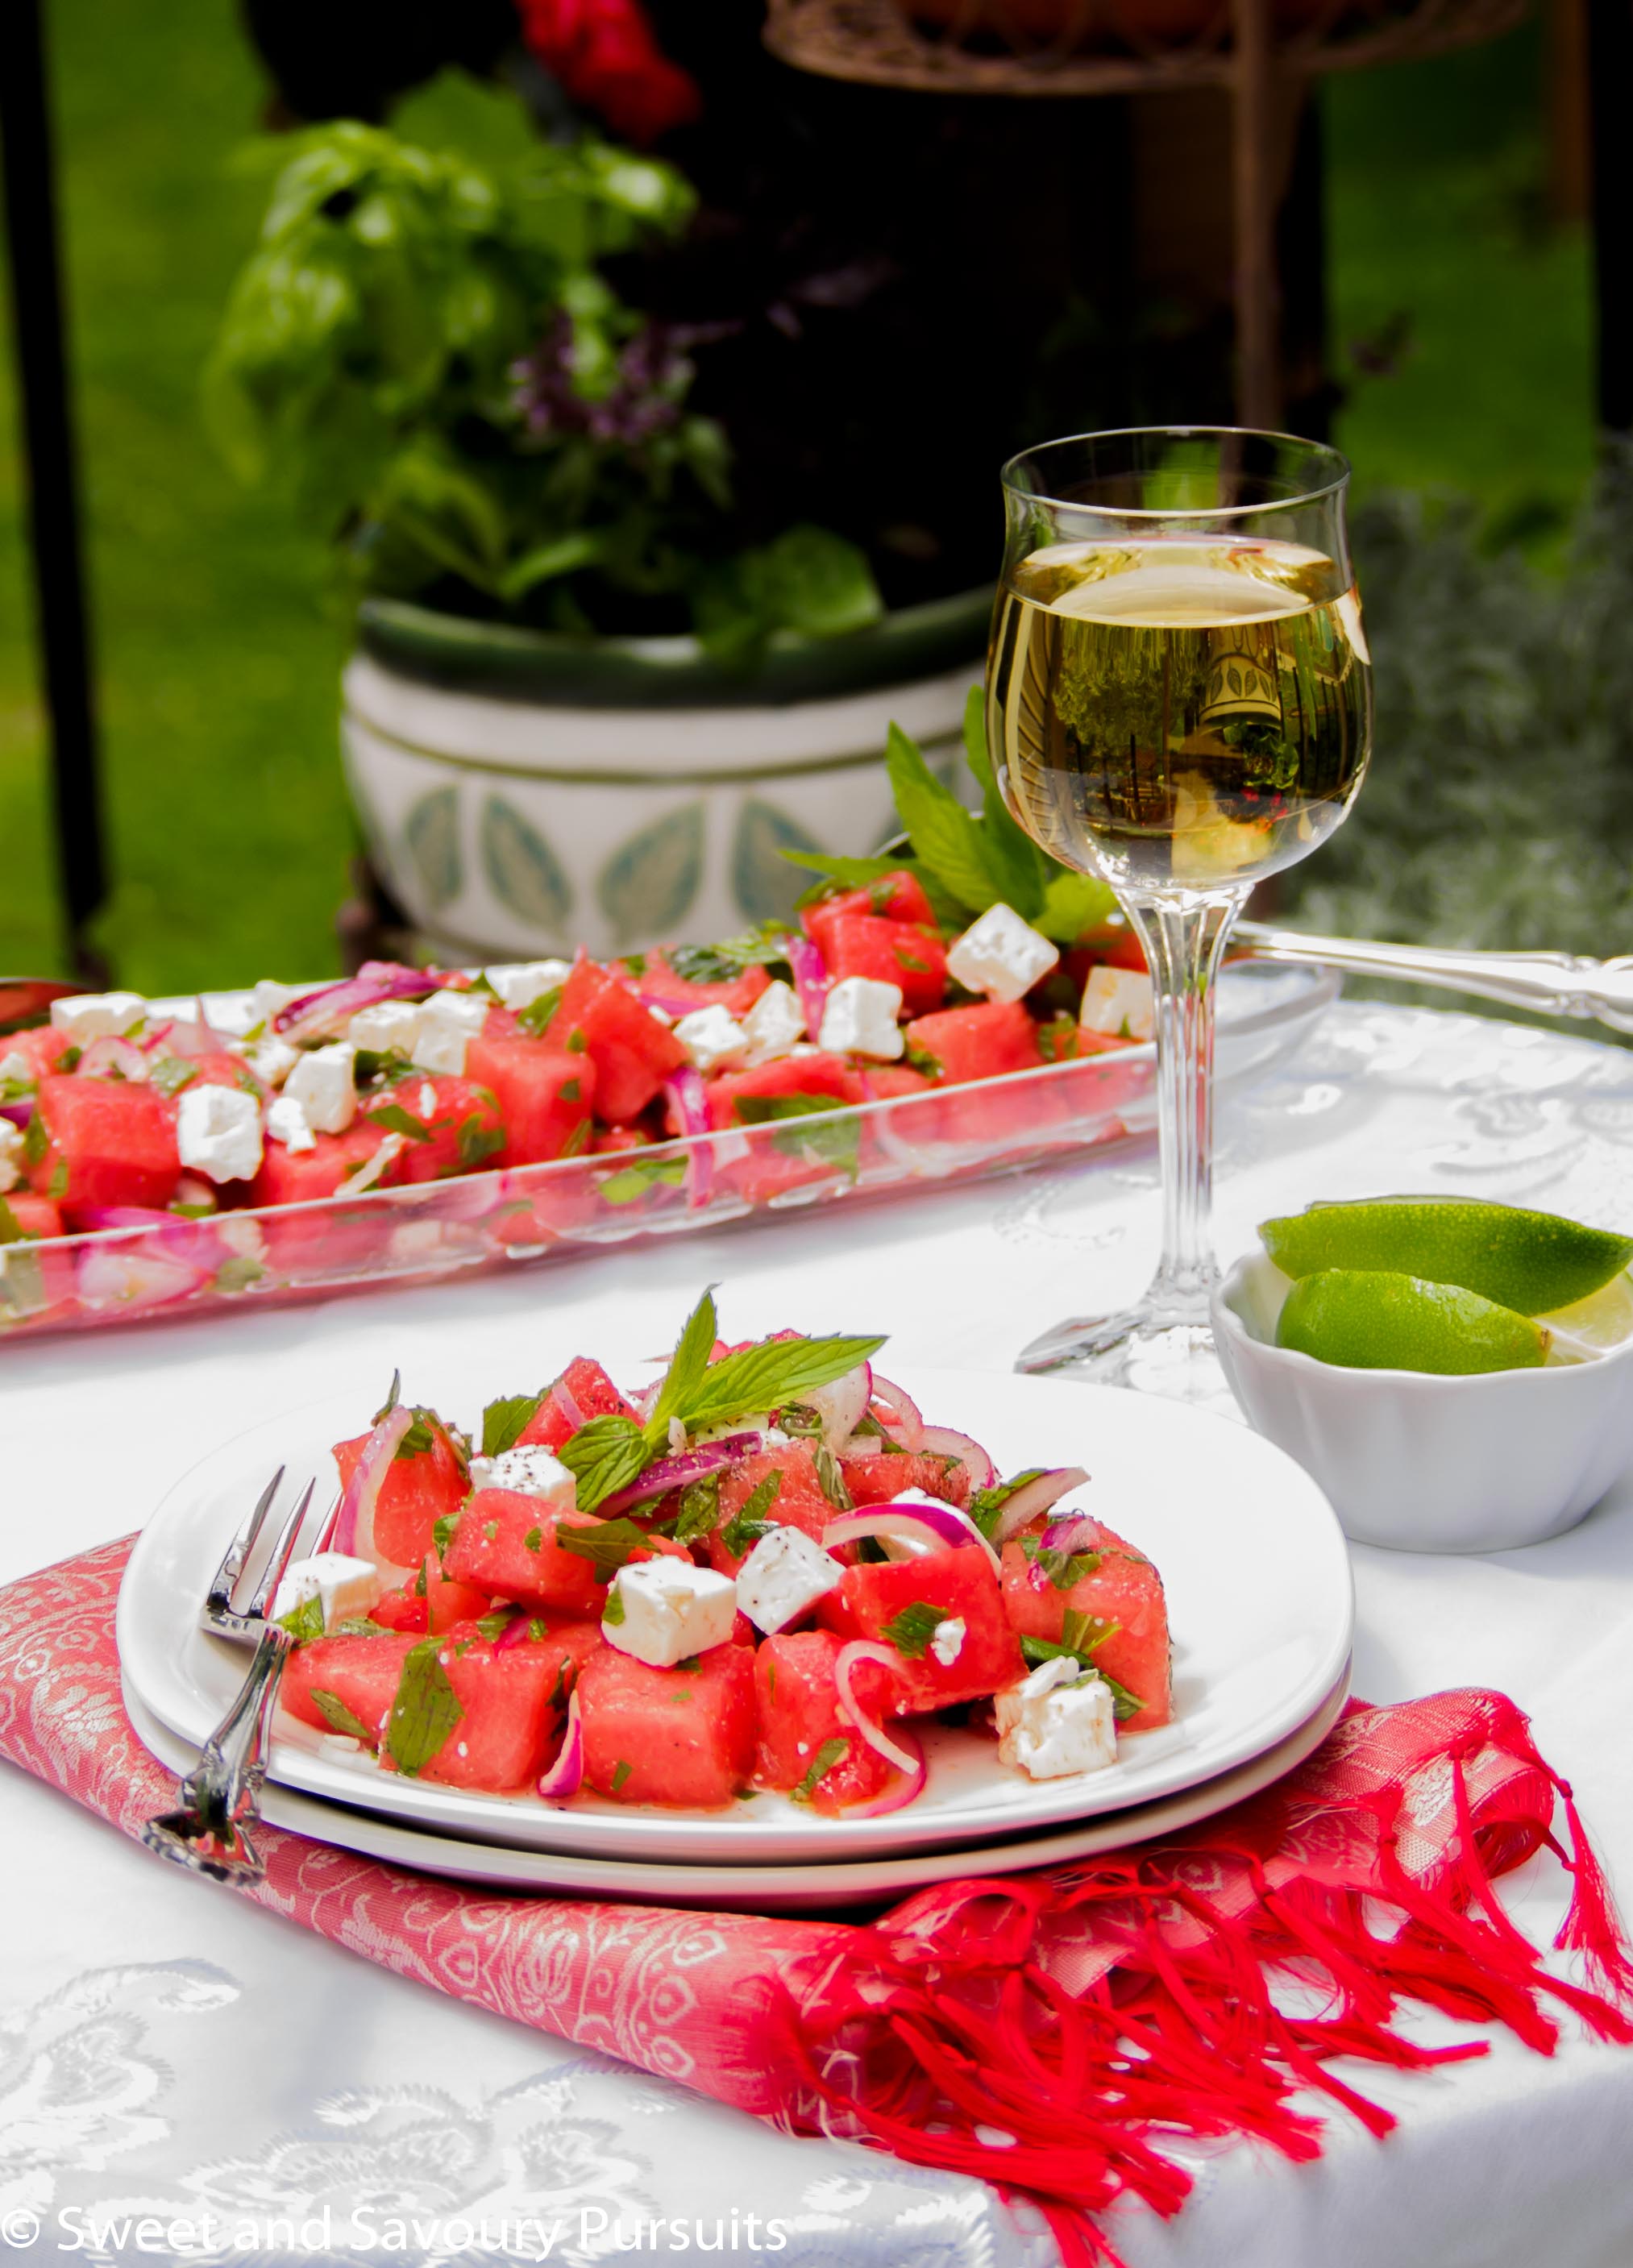 Plate of salad made with watermelon and feta cheese served outdoors.